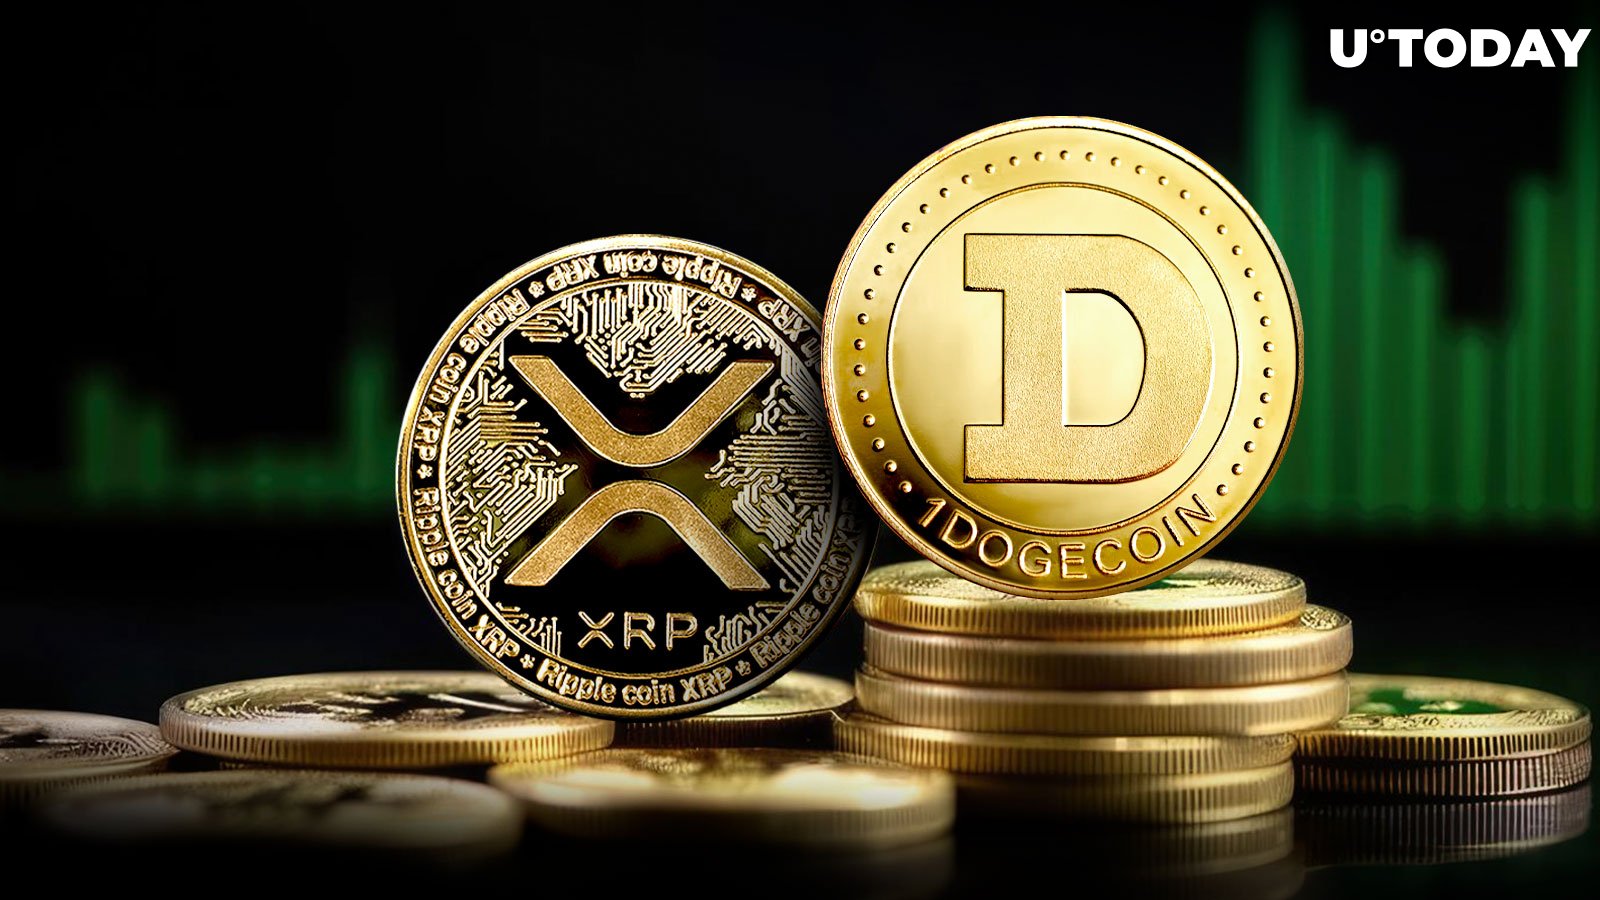 Dogecoin (DOGE) Comes Closer to Surpassing XRP